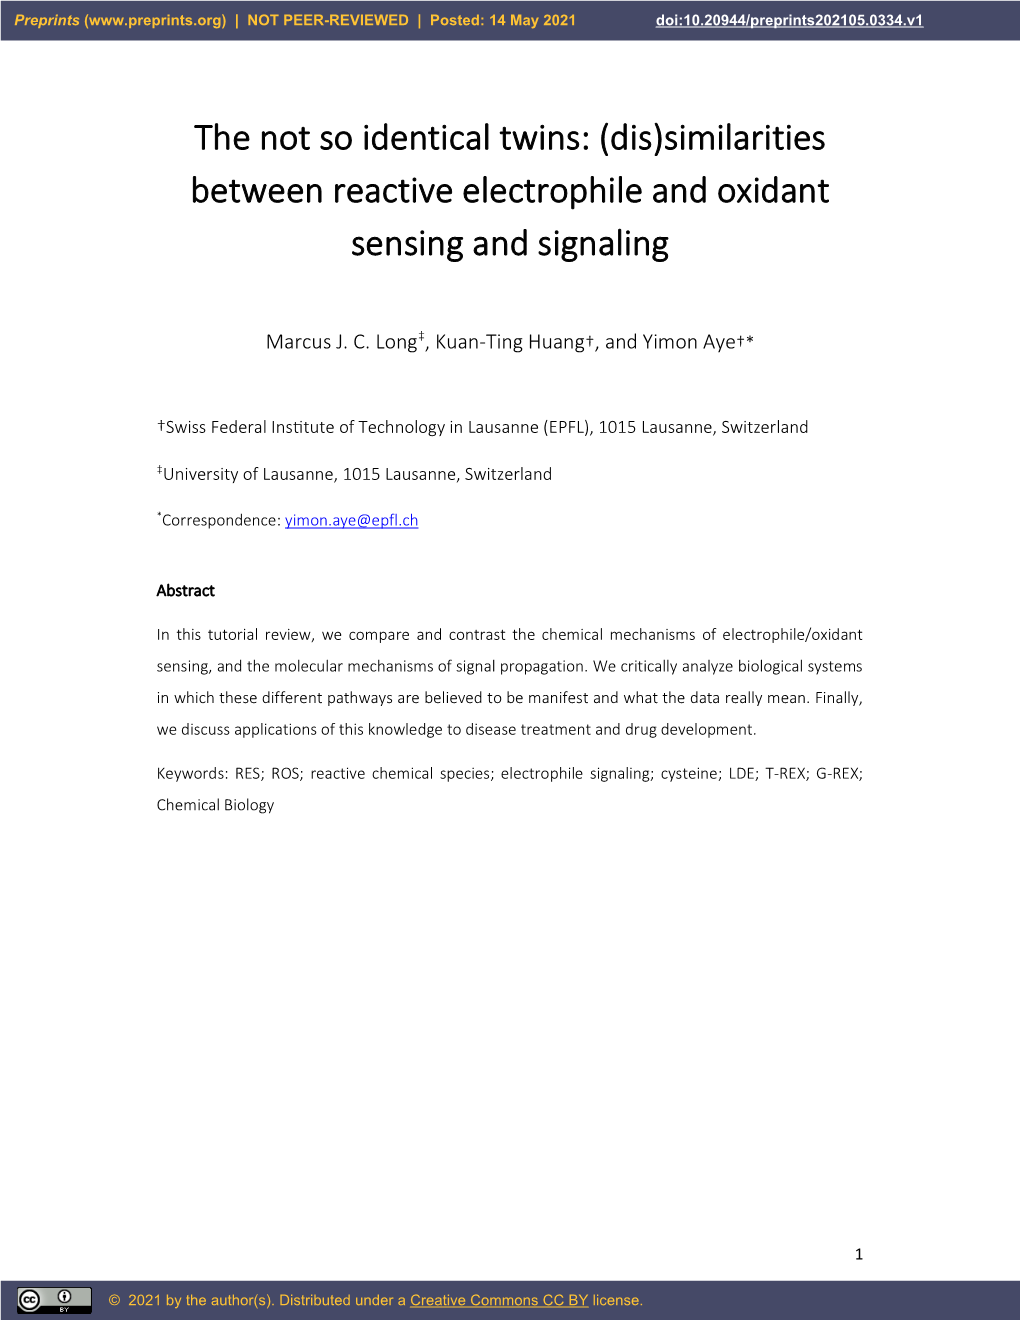 The Not So Identical Twins: (Dis)Similarities Between Reactive Electrophile and Oxidant Sensing and Signaling